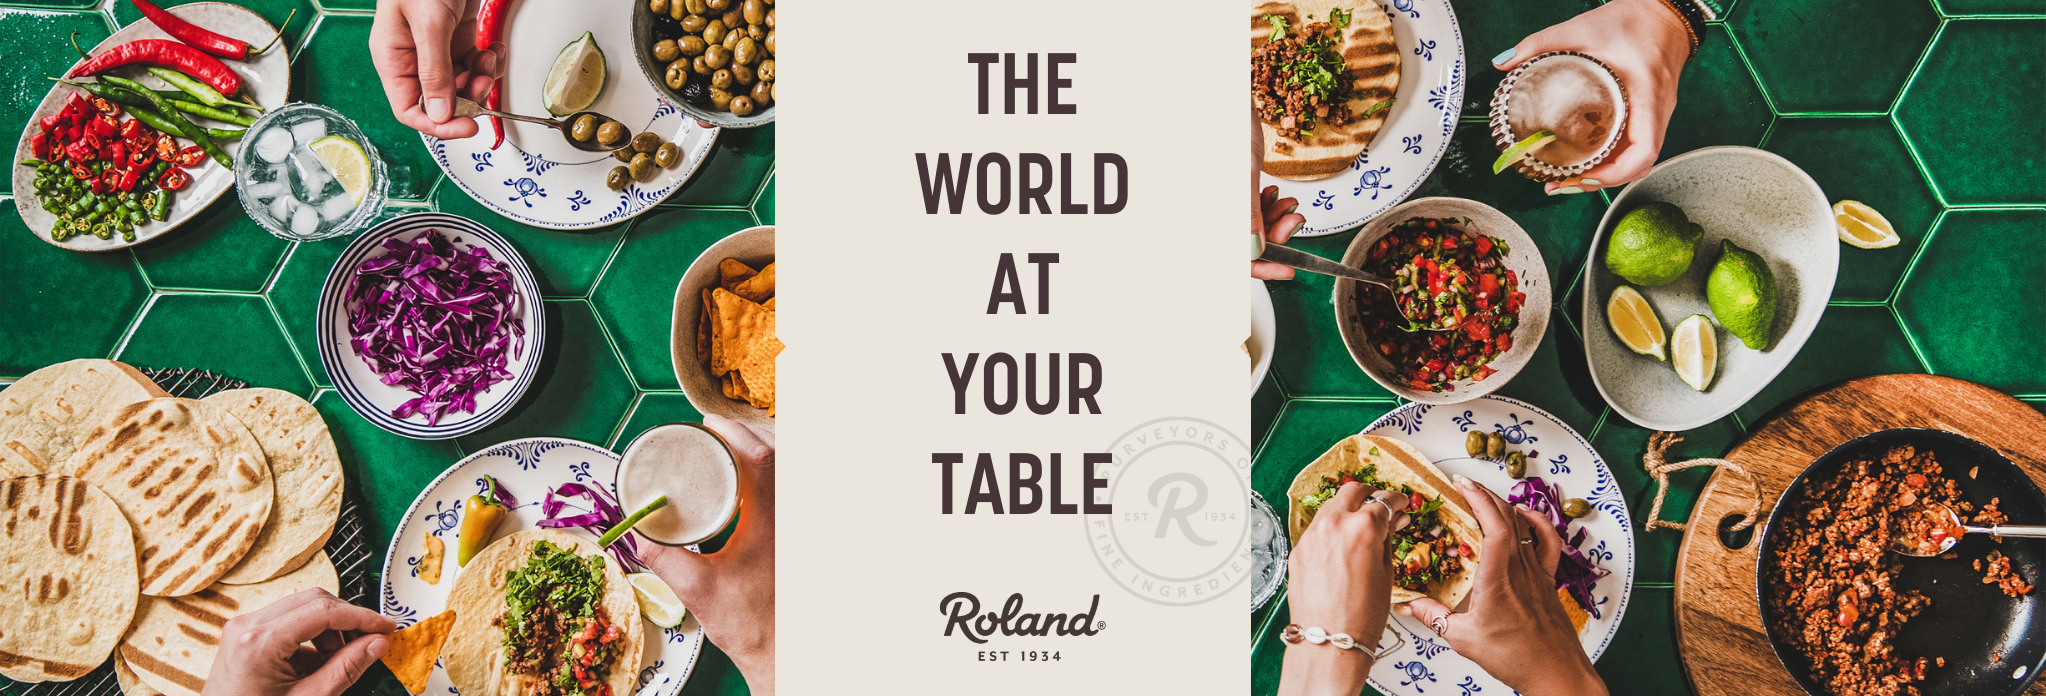 The World At Your Table Roland Foods Tagline